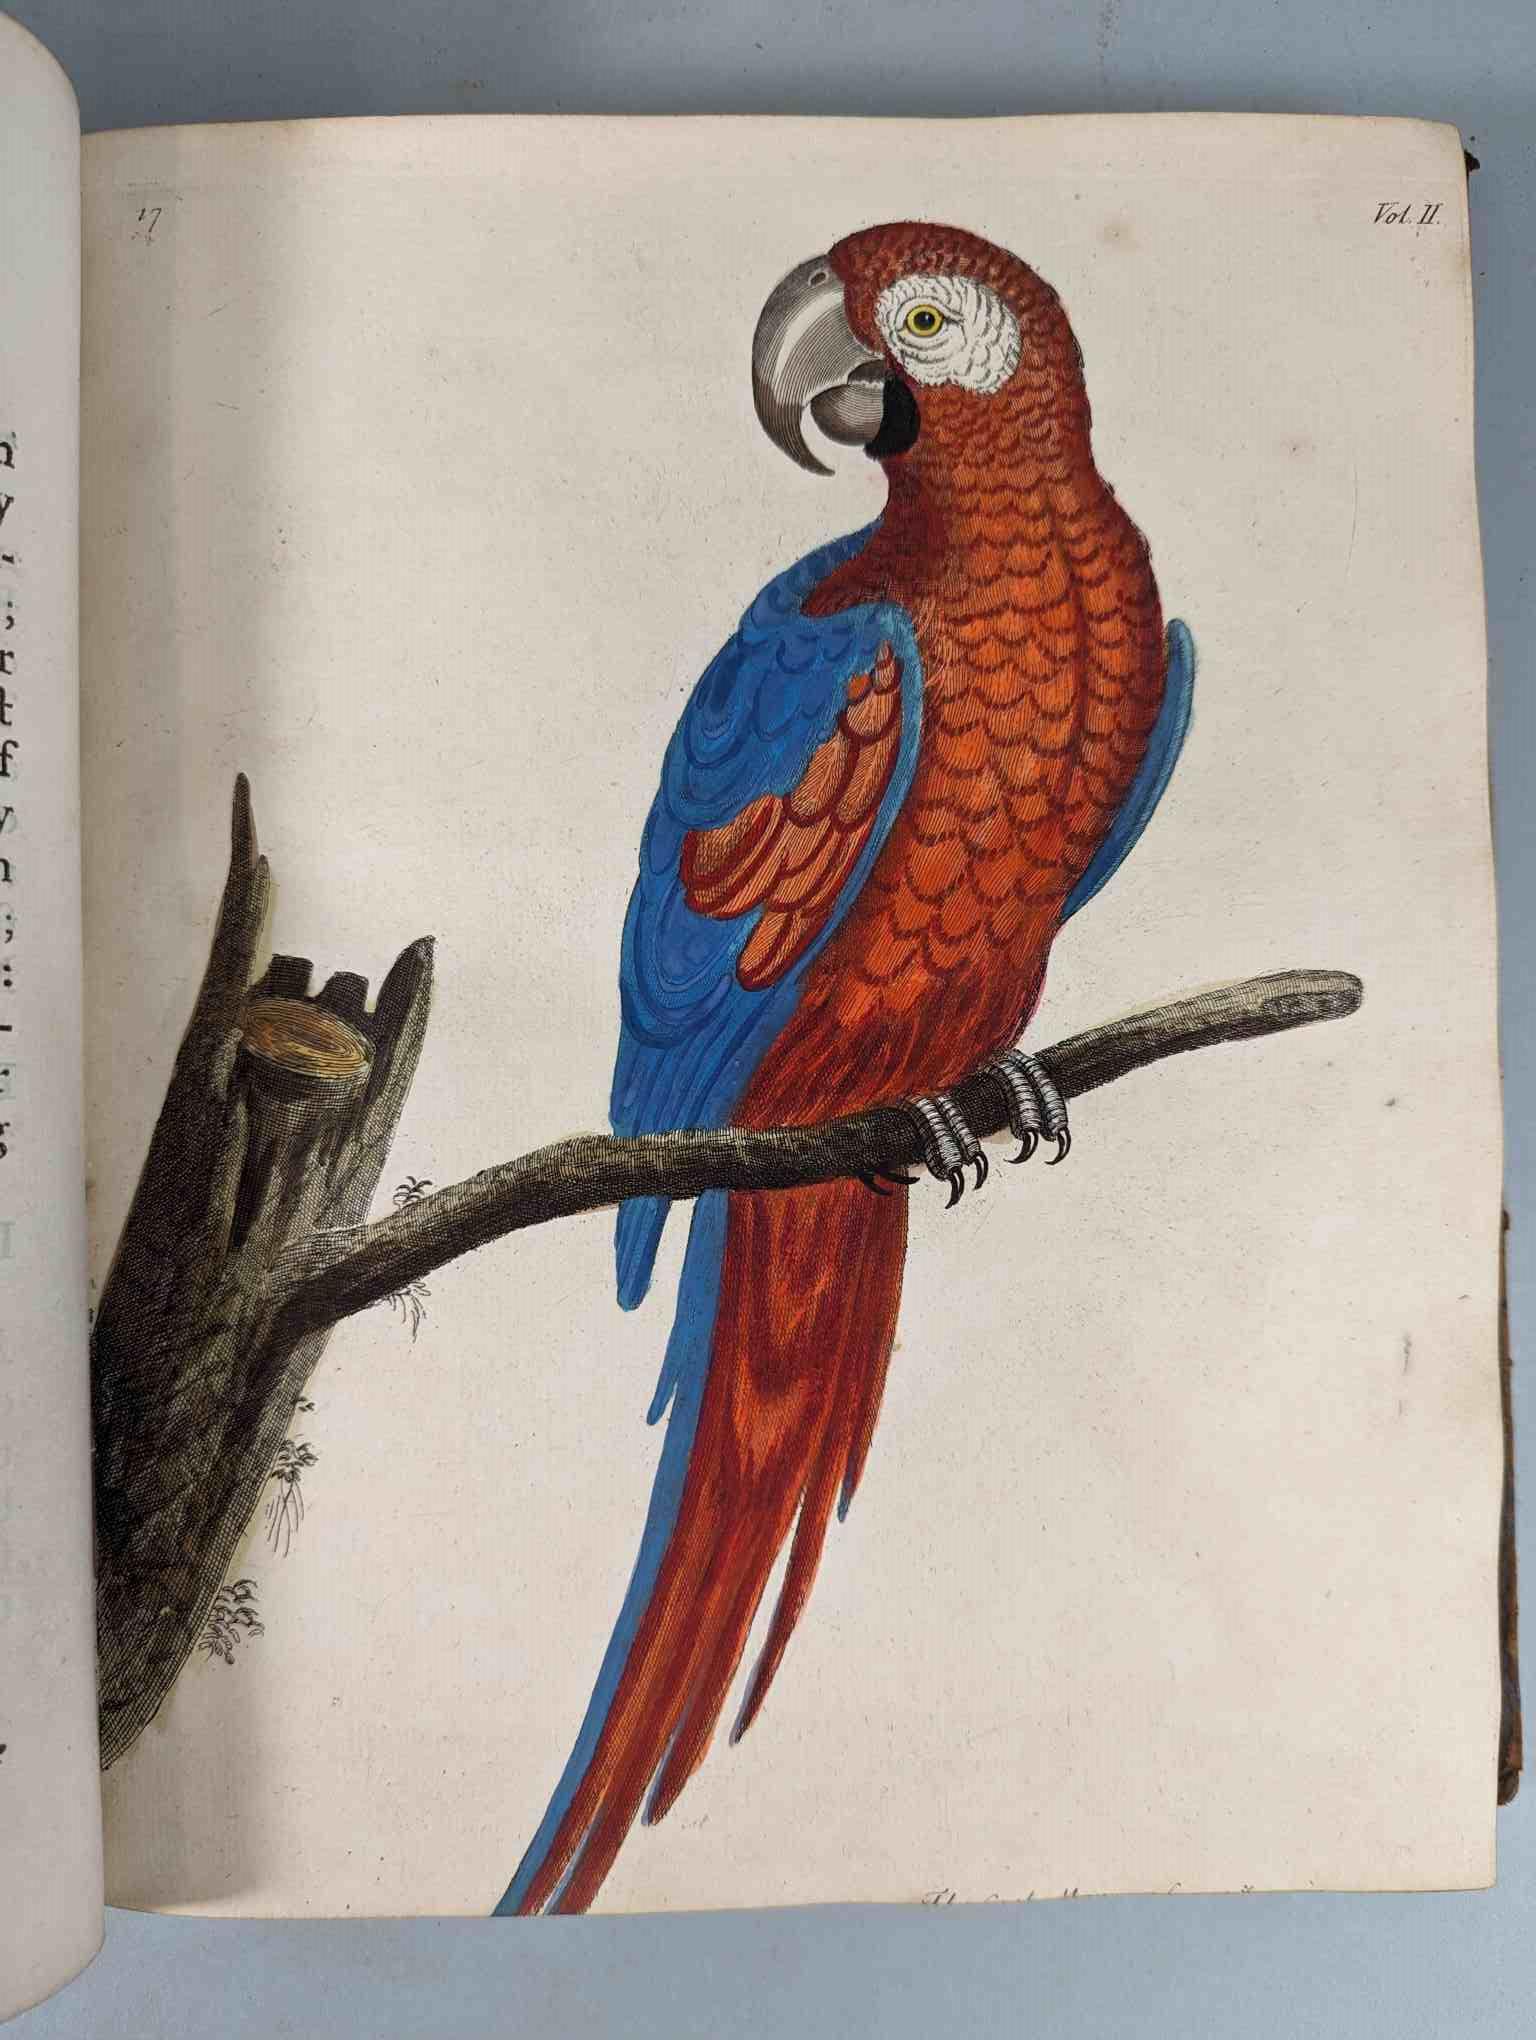 ALBIN, Eleazar. A Natural History of Birds, to which are added, Notes and Observations by W. - Image 121 of 208